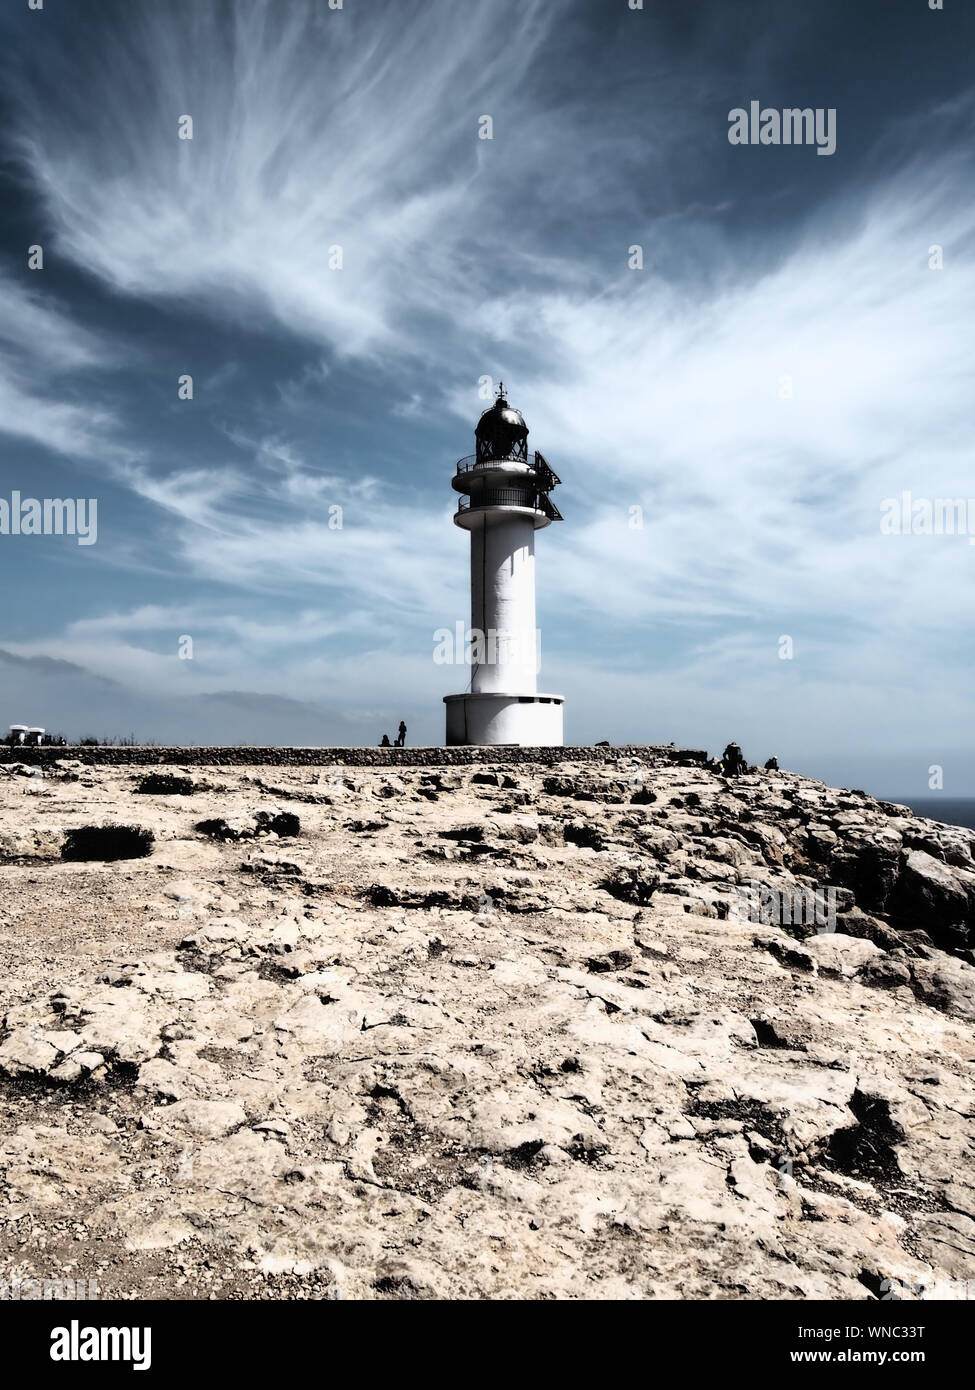 Low Angle View Of Lighthouse At Harbor Against Cloudy Sky Stock Photo